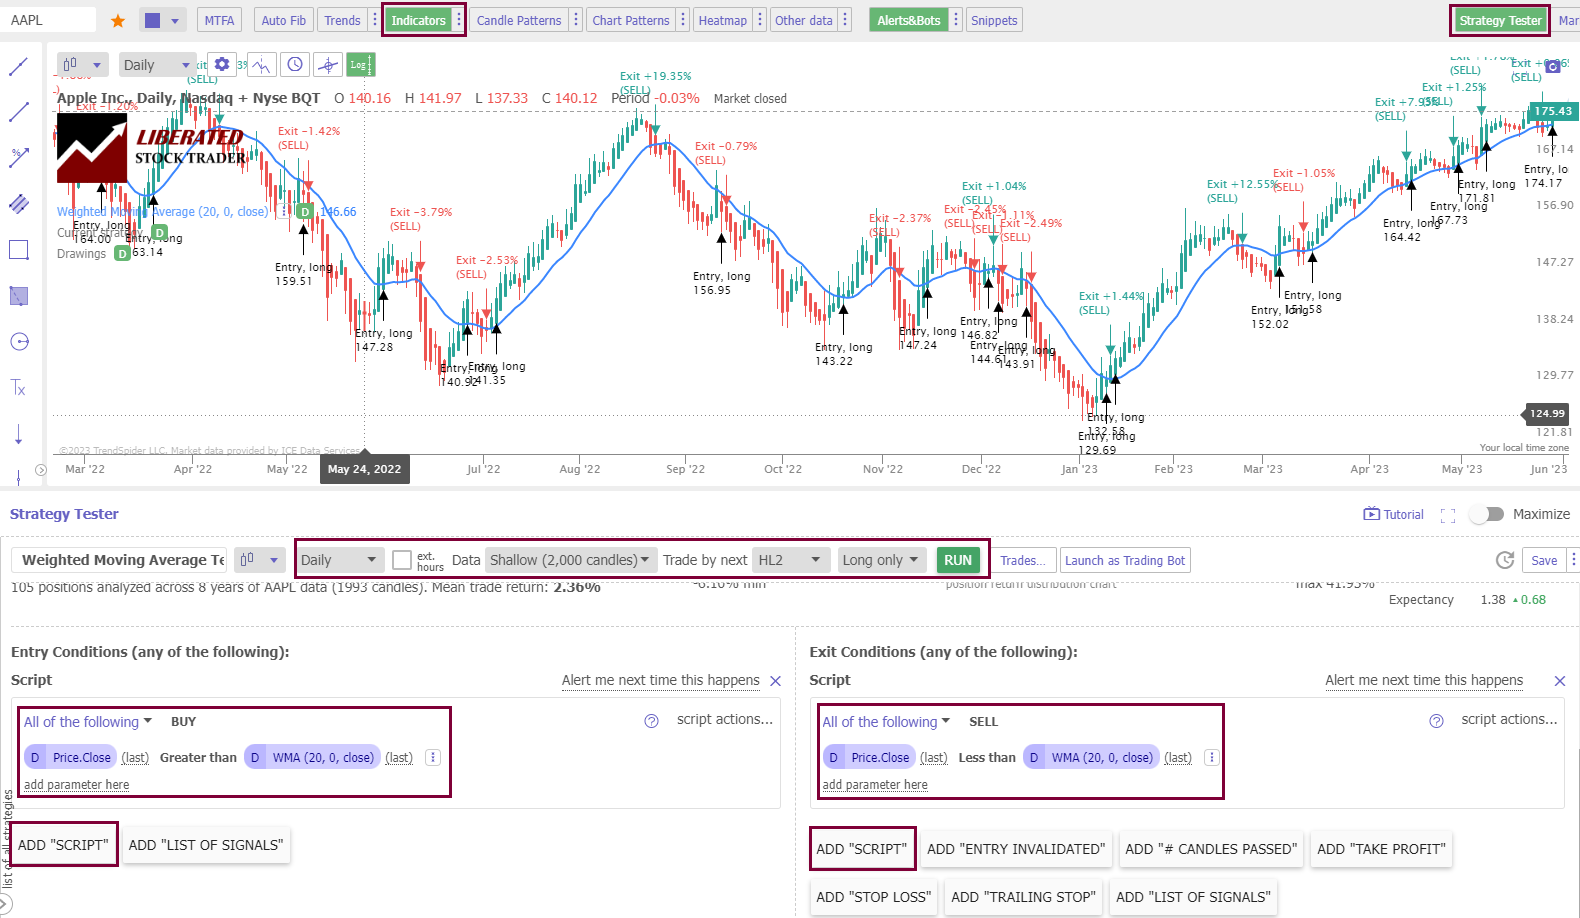 Configuring a Weighted Moving Average Backtest Using TrendSpider